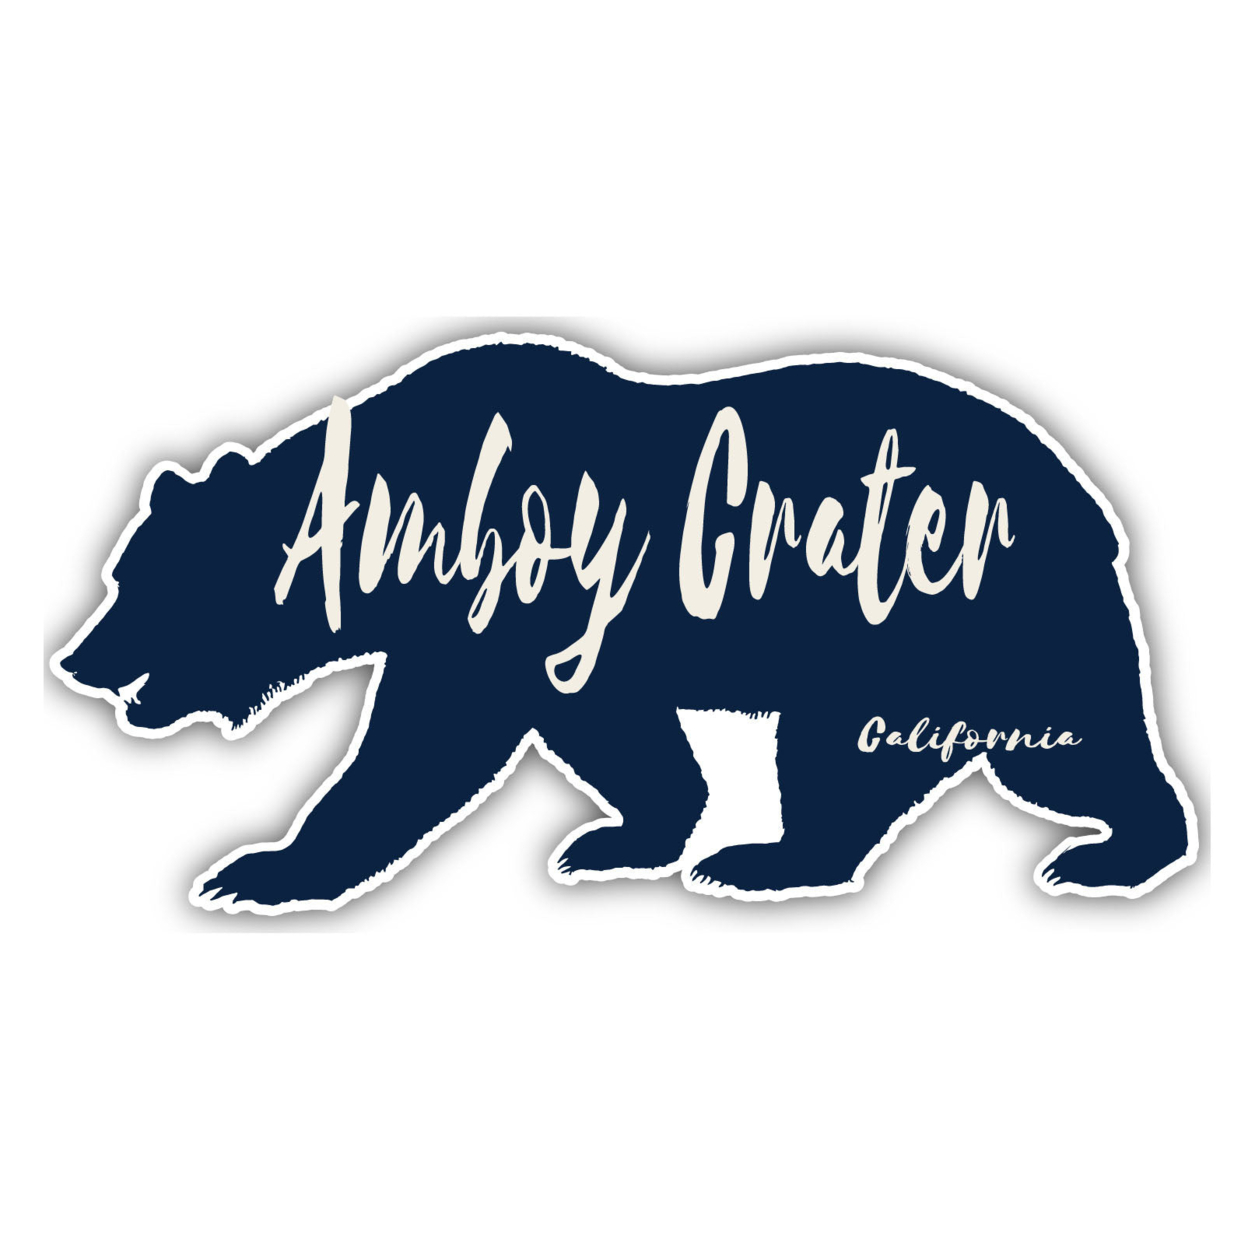 Amboy Crater California Souvenir Decorative Stickers (Choose Theme And Size) - 4-Pack, 10-Inch, Bear